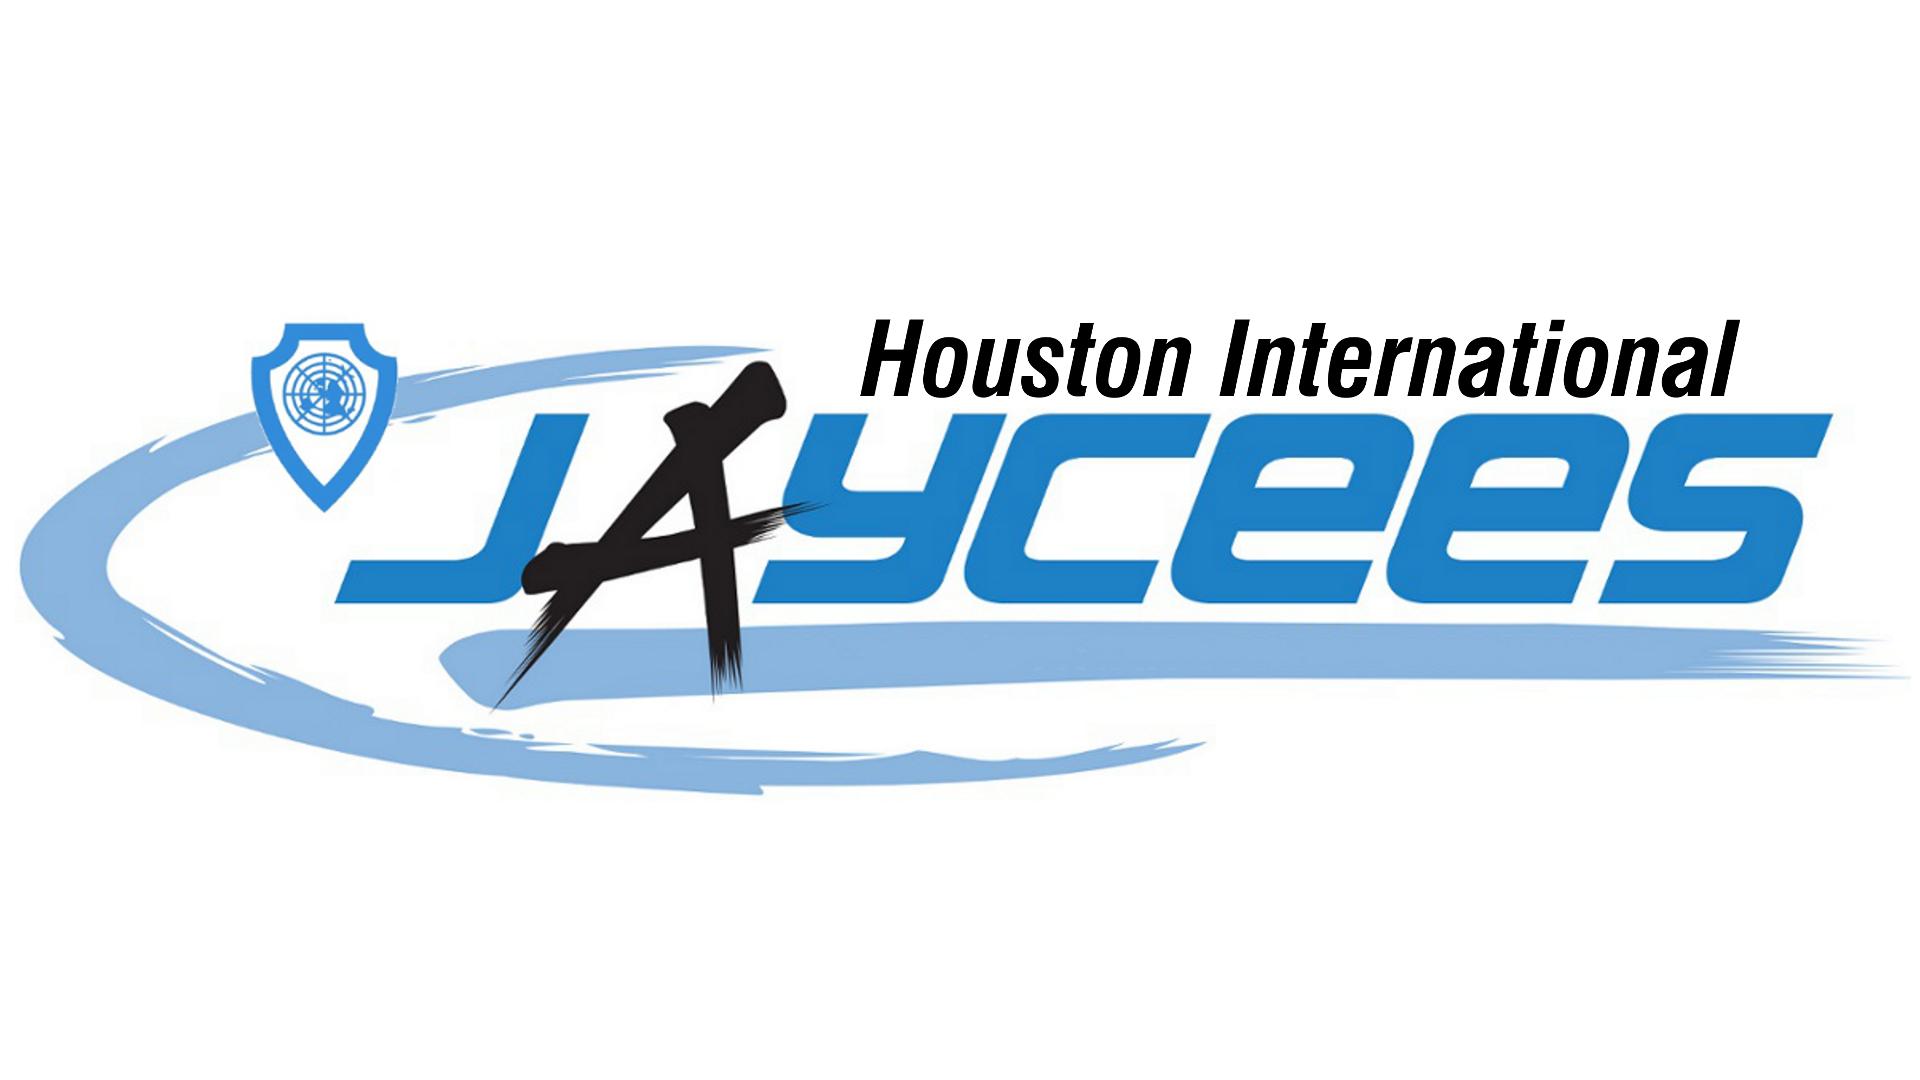 Young Professionals Networking & Noms - Houston International Jaycees